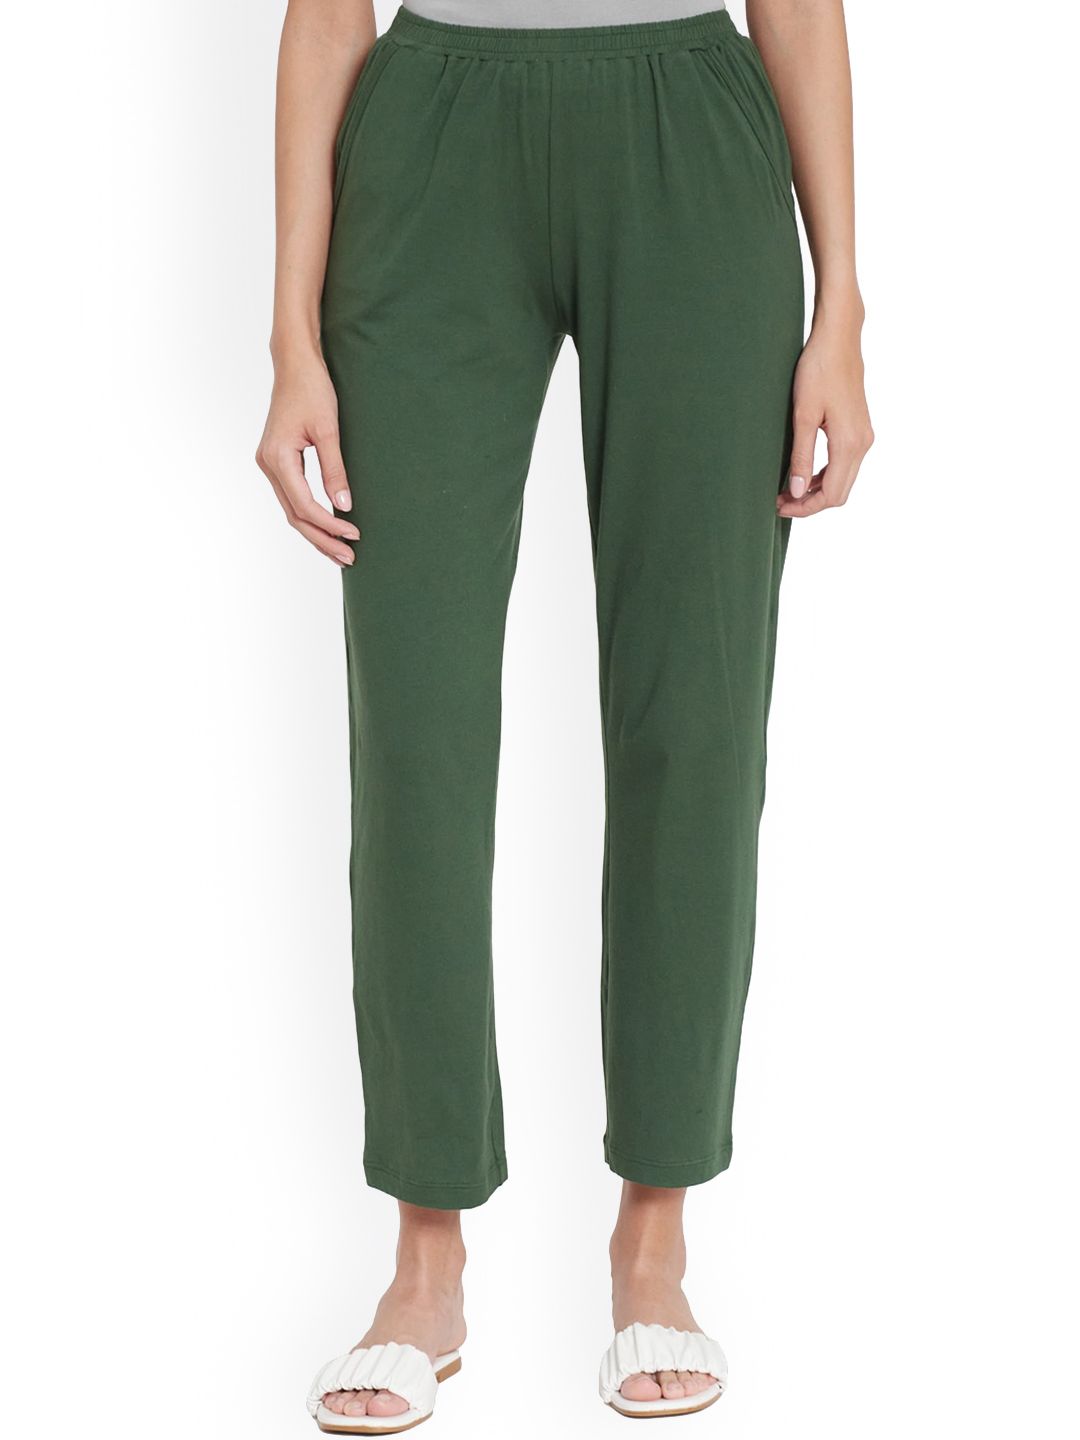 UNMADE Women Sea Green Solid Cotton Lounge Pants Price in India